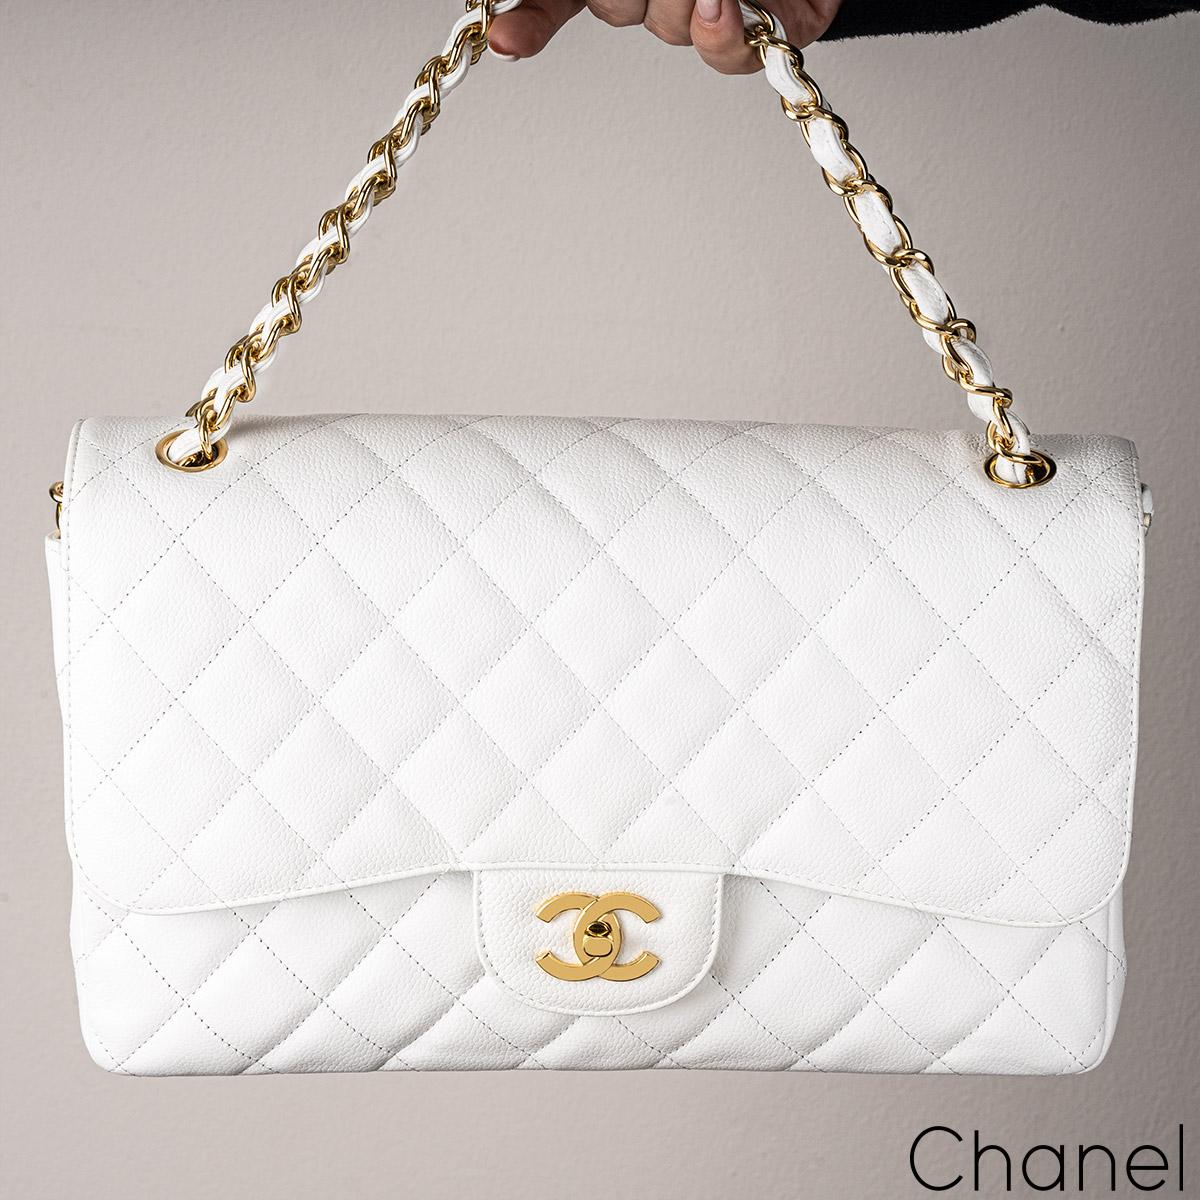 Chanel White Caviar Jumbo Classic Double Flap Bag with Gold Hardware 5